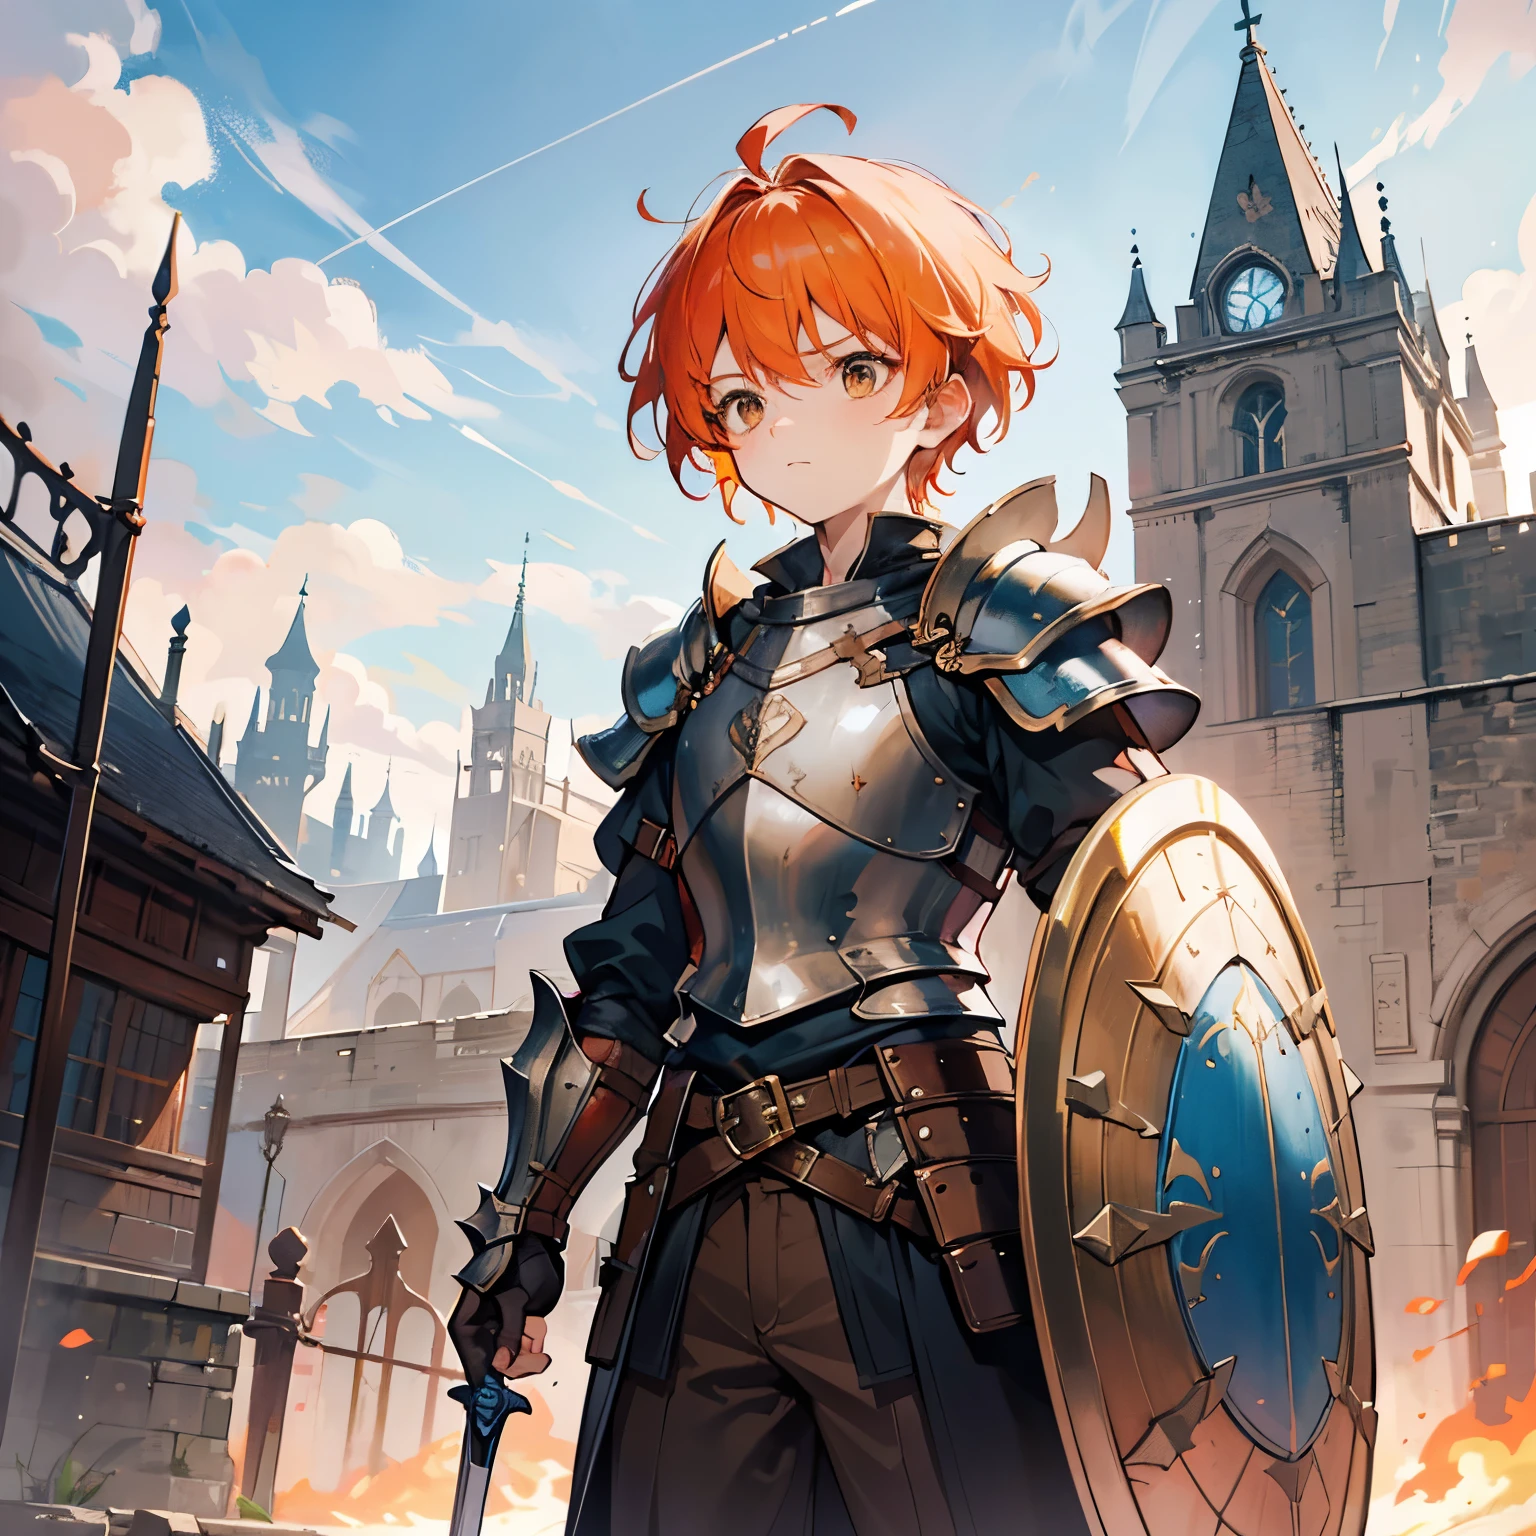 Front view, dynamic angle, 1 boy, young boy, kid knight, kid knight, very spiky hair, spiky hair, orange hair, orange spiky hair, brown eyes, cute, scared expression, unsure expression, shy expression, brown outfit, a few armor pieces, 1 shoulder plate, shoulder plate and gauntlet in his left arm, armor headpiece, minimal chest plate, no lower body armor, holding a big wooden shield, big wooden shield, round shield, oversized shield, sword, medieval setting, medieval city background, castle background, medieval castle background